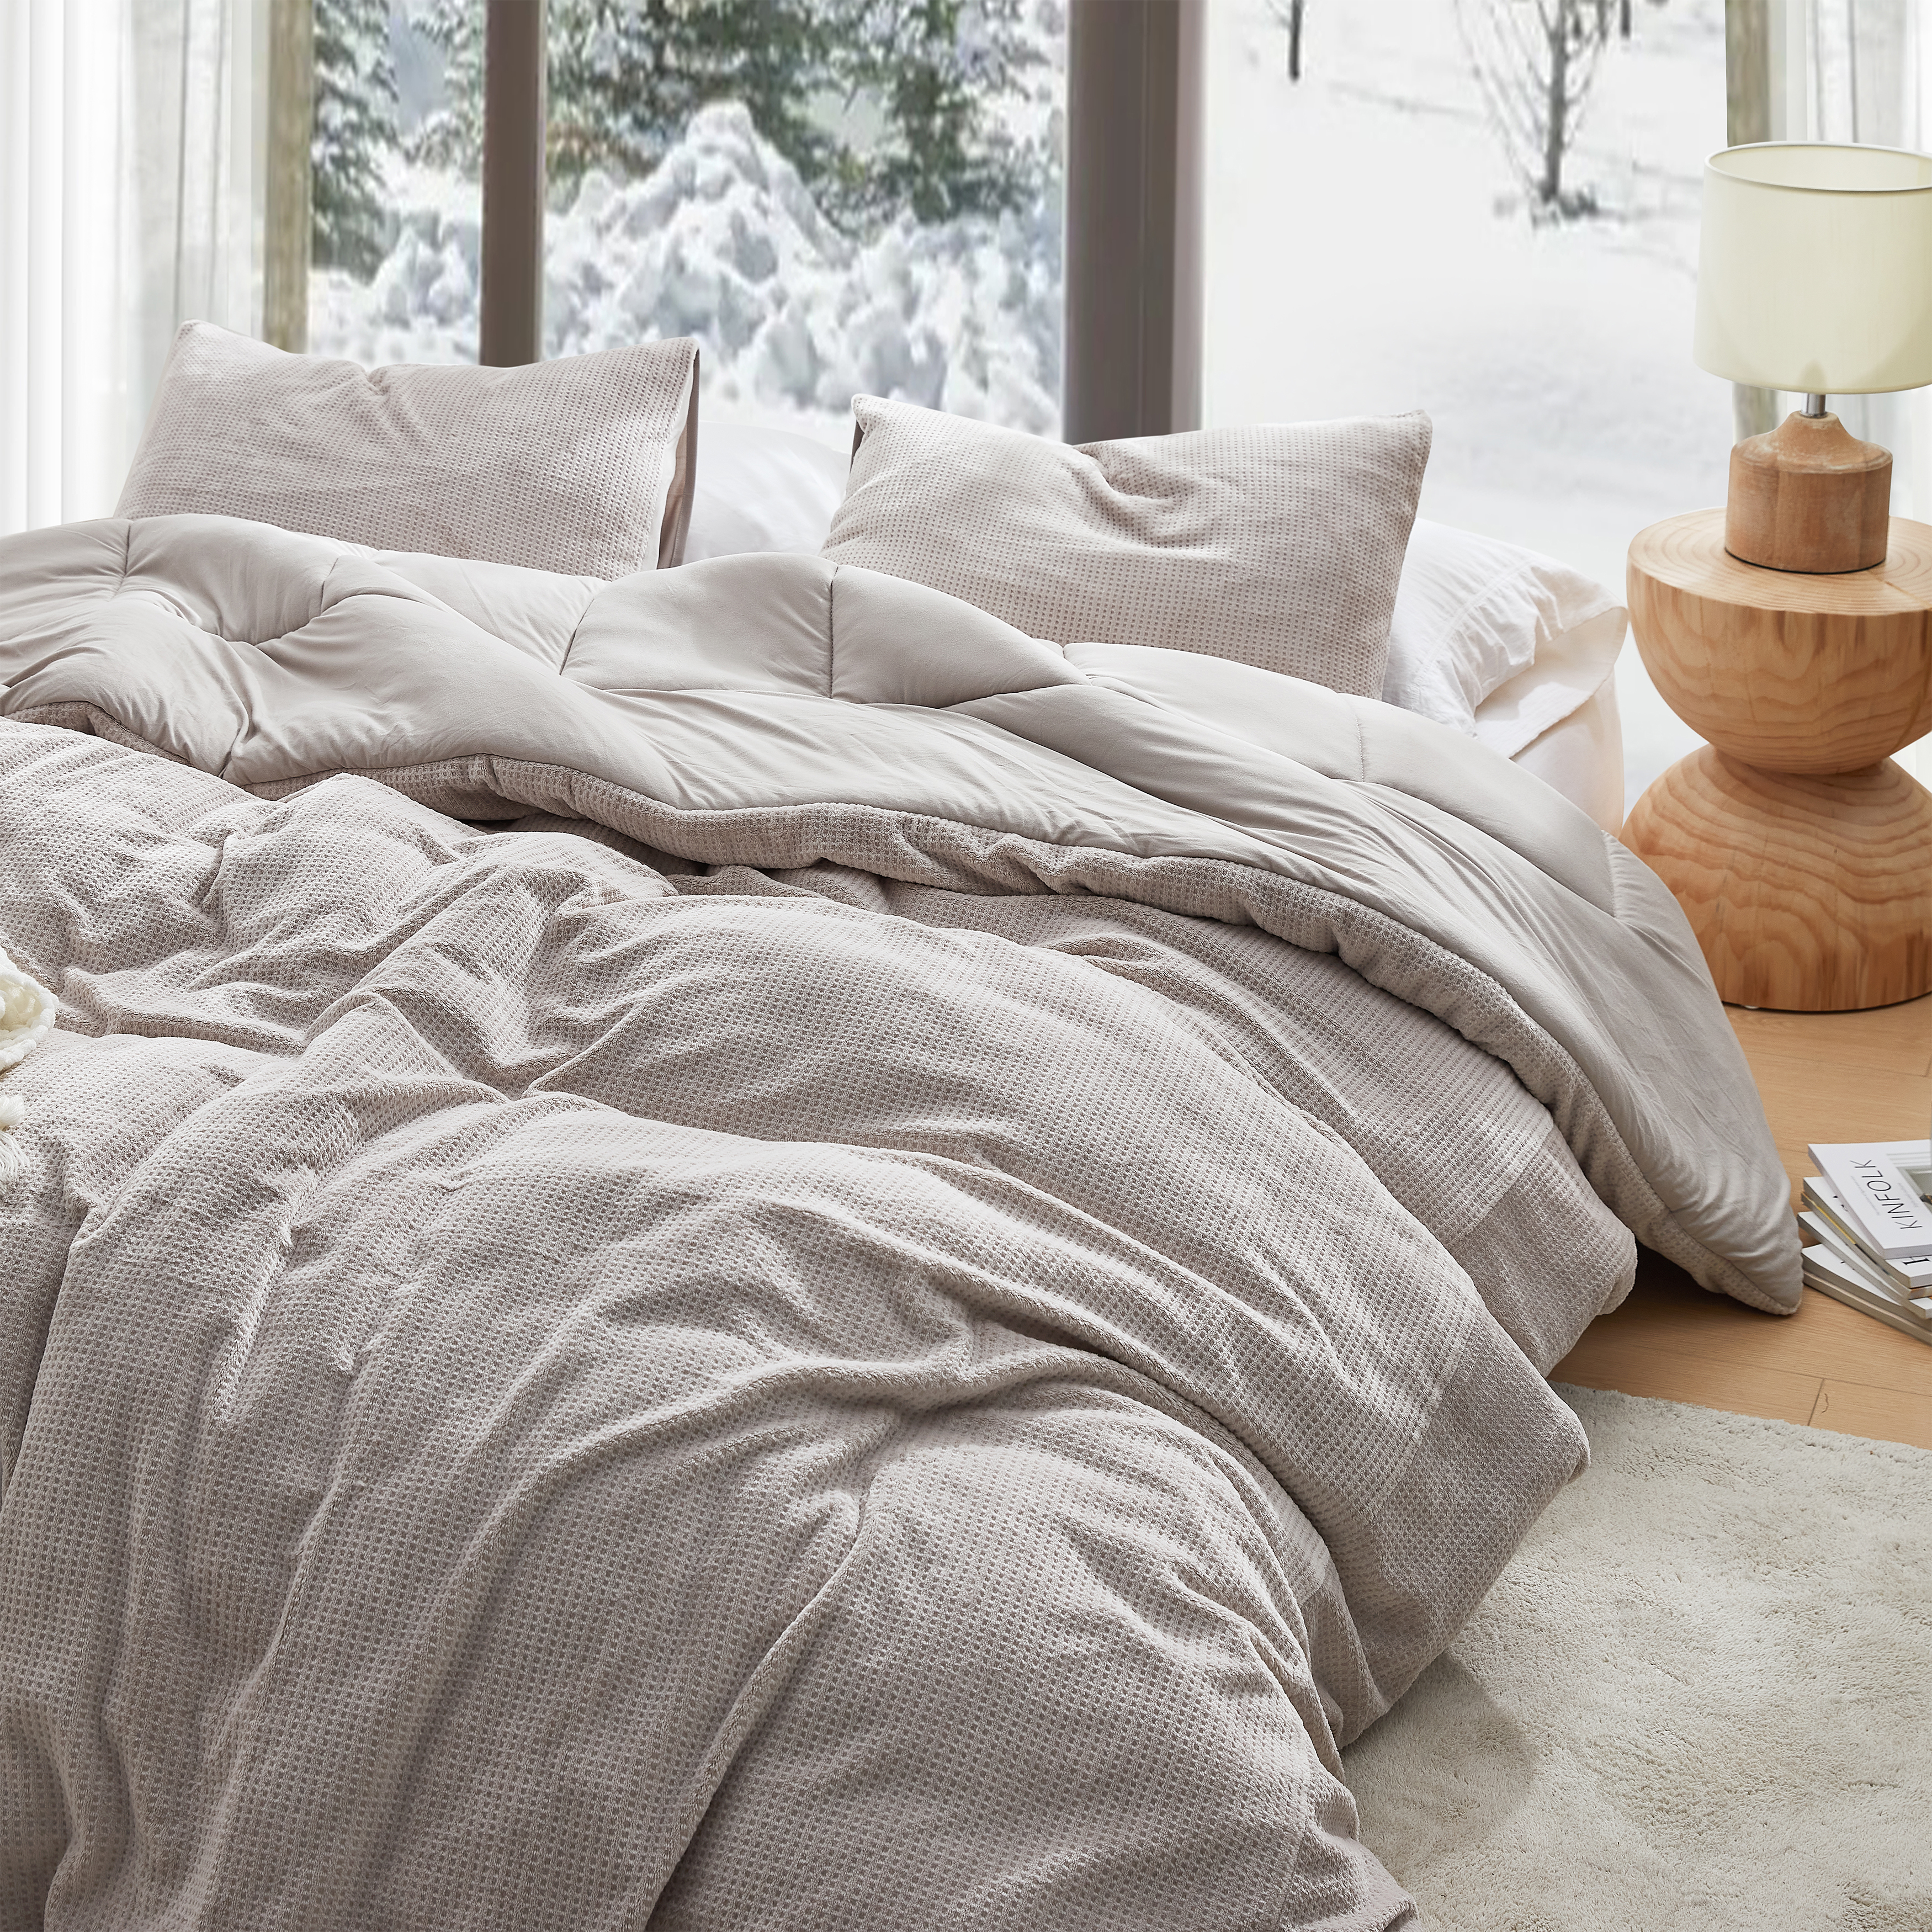 Coma-holic - Coma Inducer (with Butter) Oversized Comforter - Warming Taupe